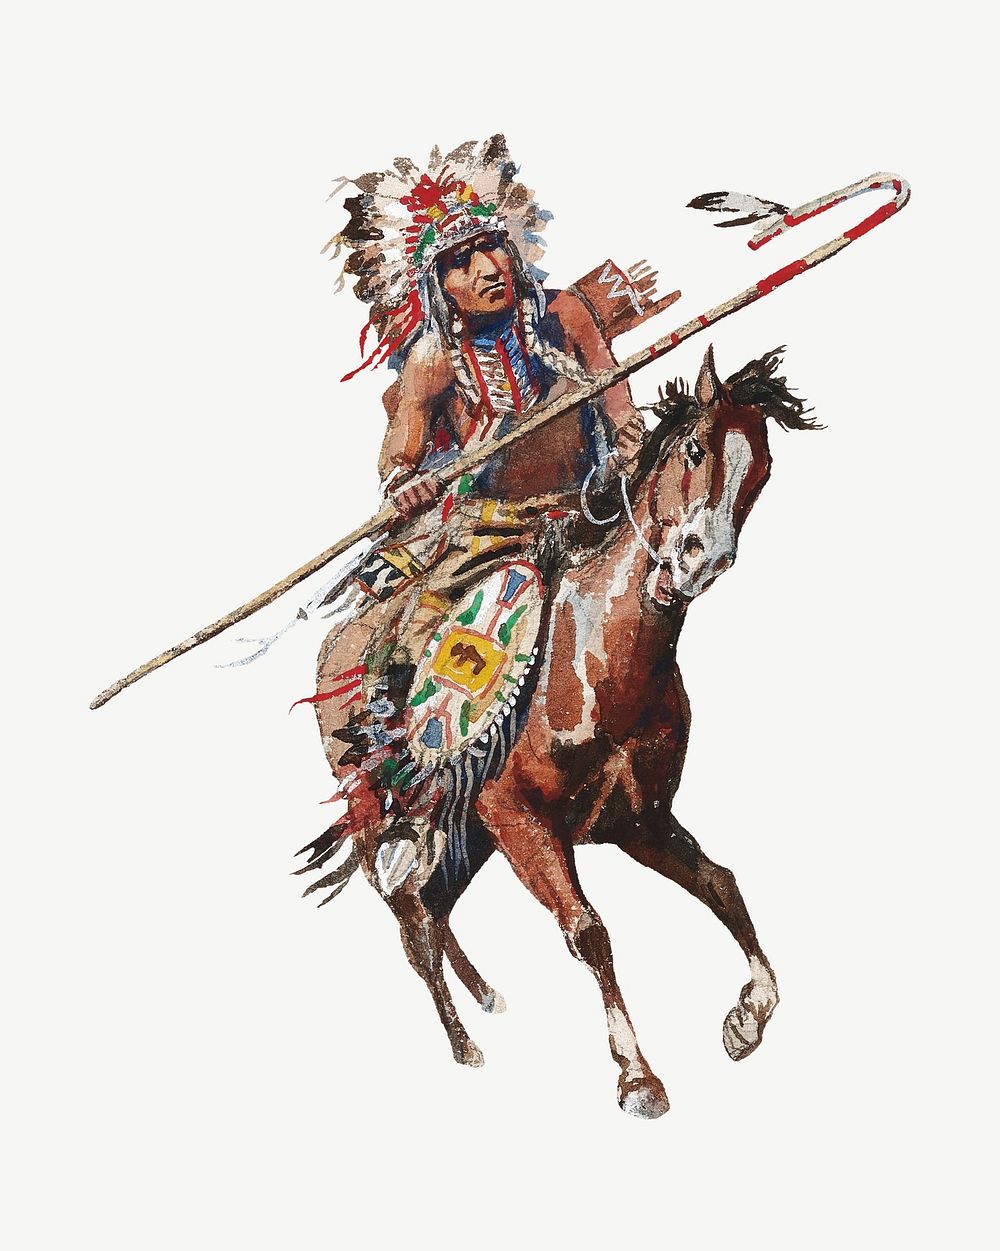 Native American & horse watercolor illustration element psd. Remixed from Charles M Russell artwork, by rawpixel.